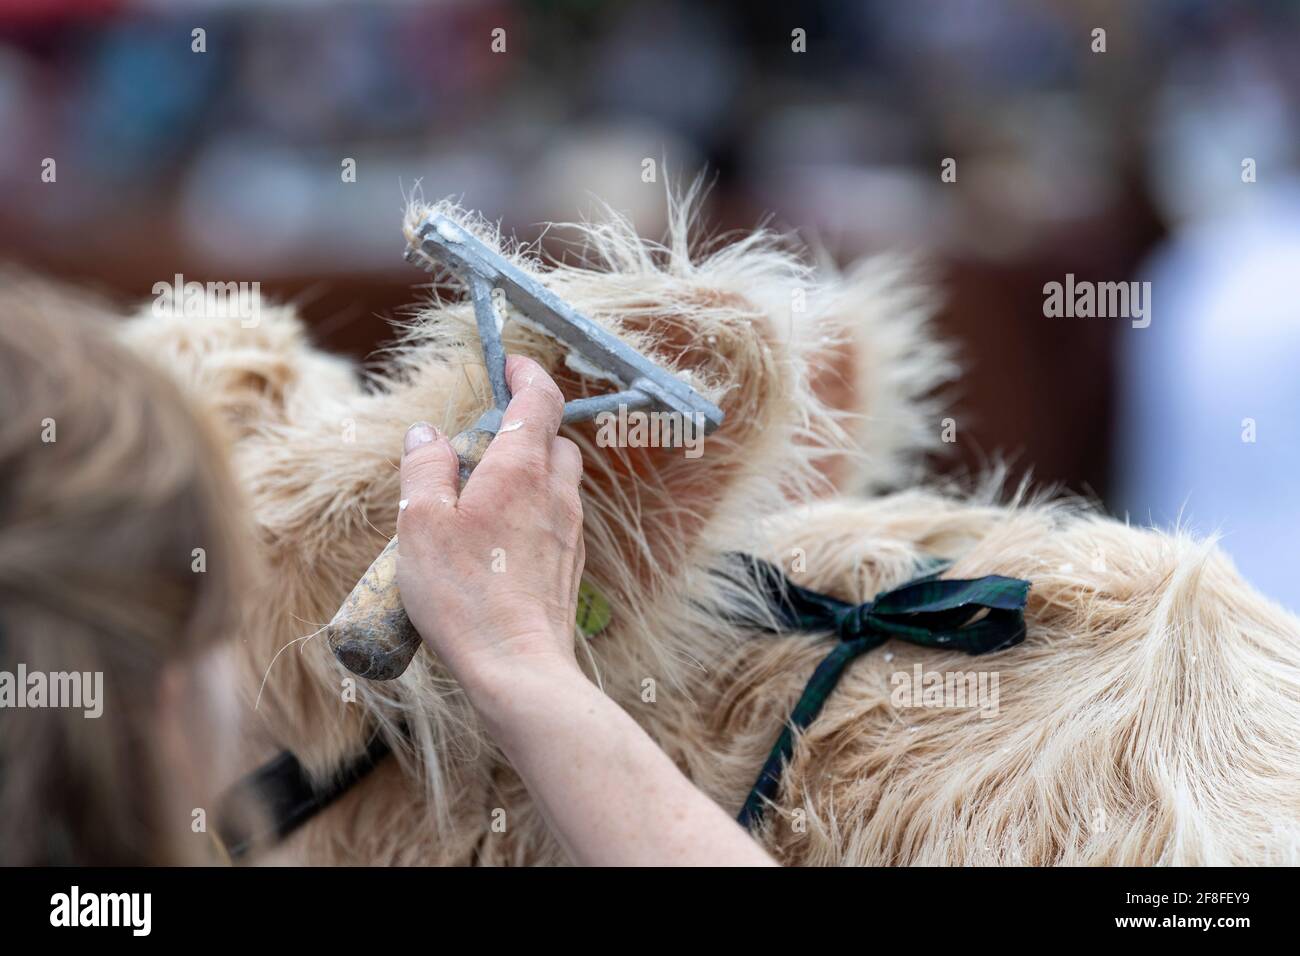 Preparing pedigree Charolais cattle for judging at the Royal Welsh Show in 2019, using soap, talc and a brush. Stock Photo